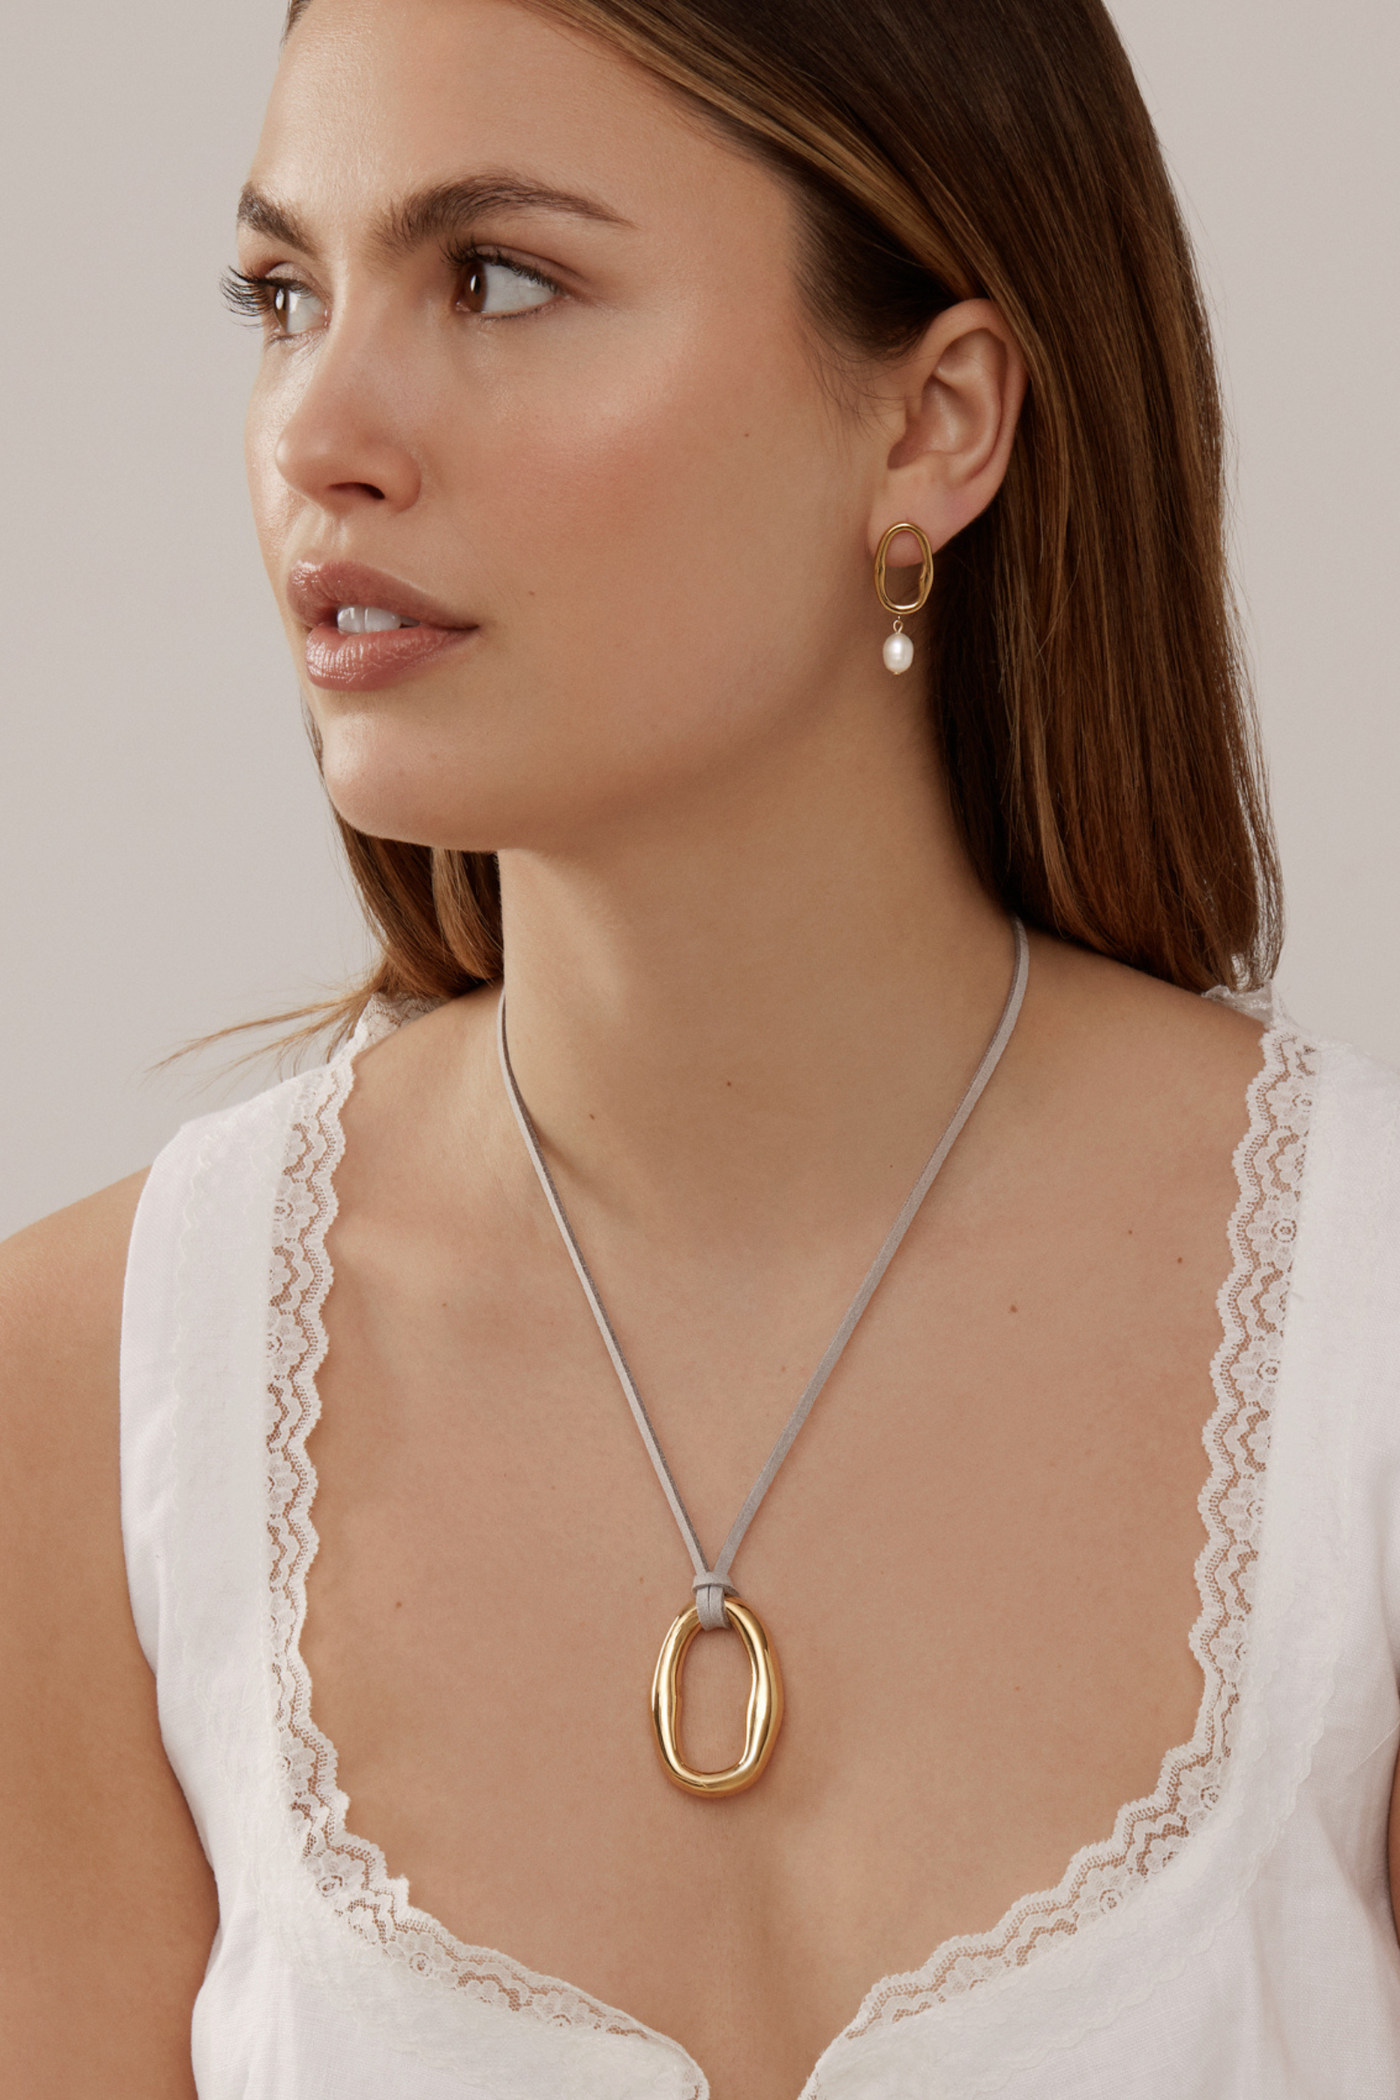 Dolce Necklace - Gold Dolce Necklace - Gold